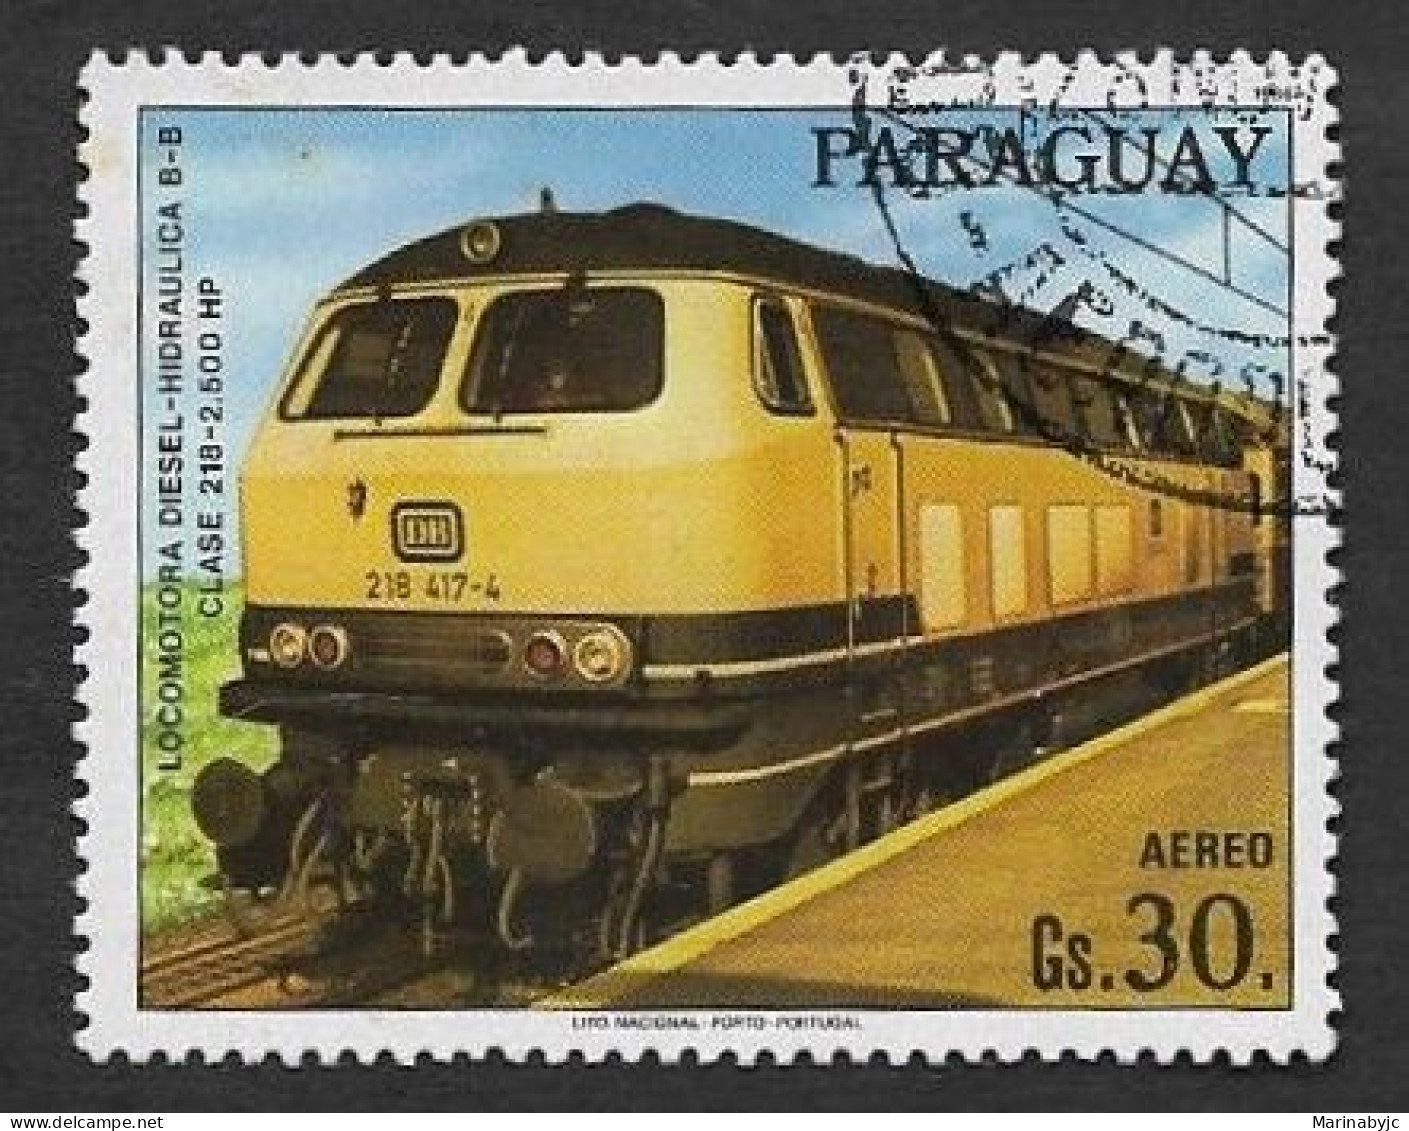 SE)1986 PARAGUAY, FROM THE TRAINS SERIES, DIESEL LOCOMOTIVE - HYDRAULICS, CTO - Paraguay